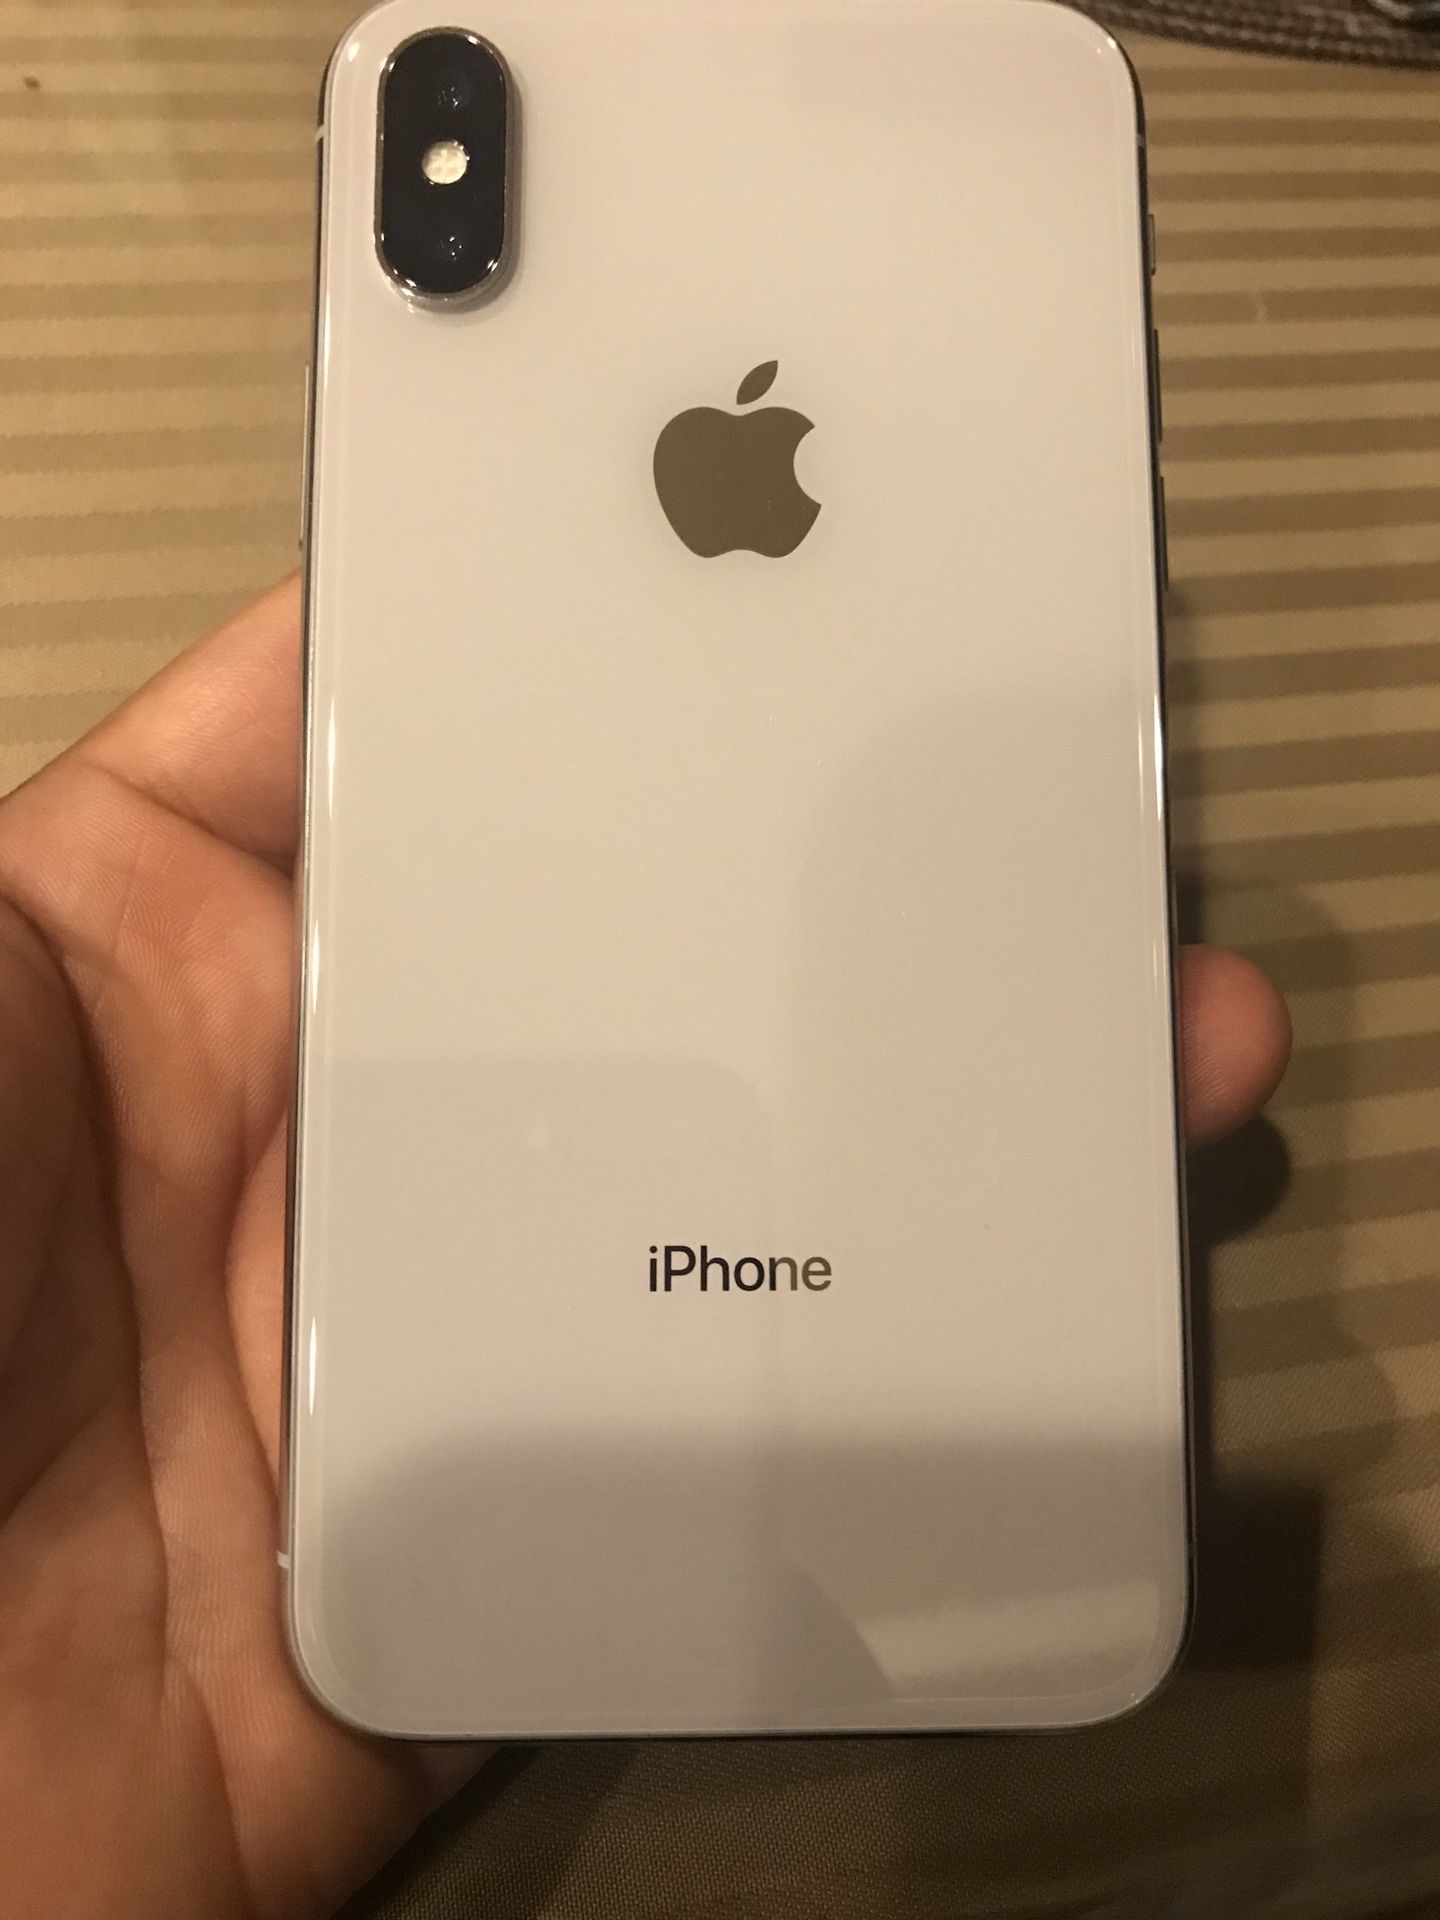 iPhone X unlocked Verizon IF AD IS UP, it’s AVAILABLE